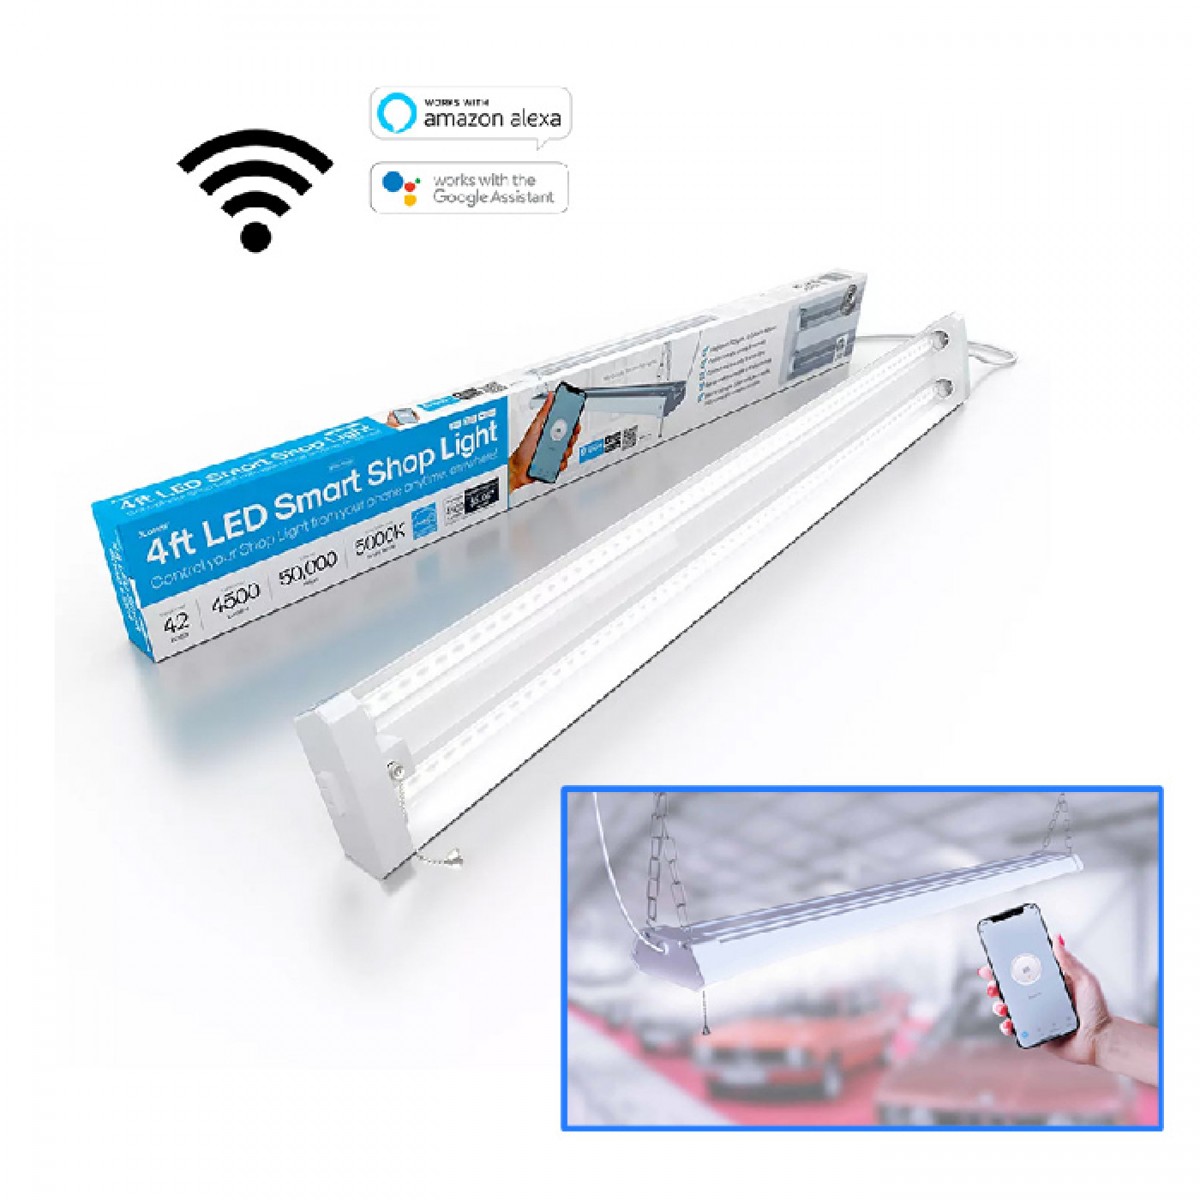 Smart Shop Light with Integrated LED Strip - Wi-Fi - 42 W - 5000 K